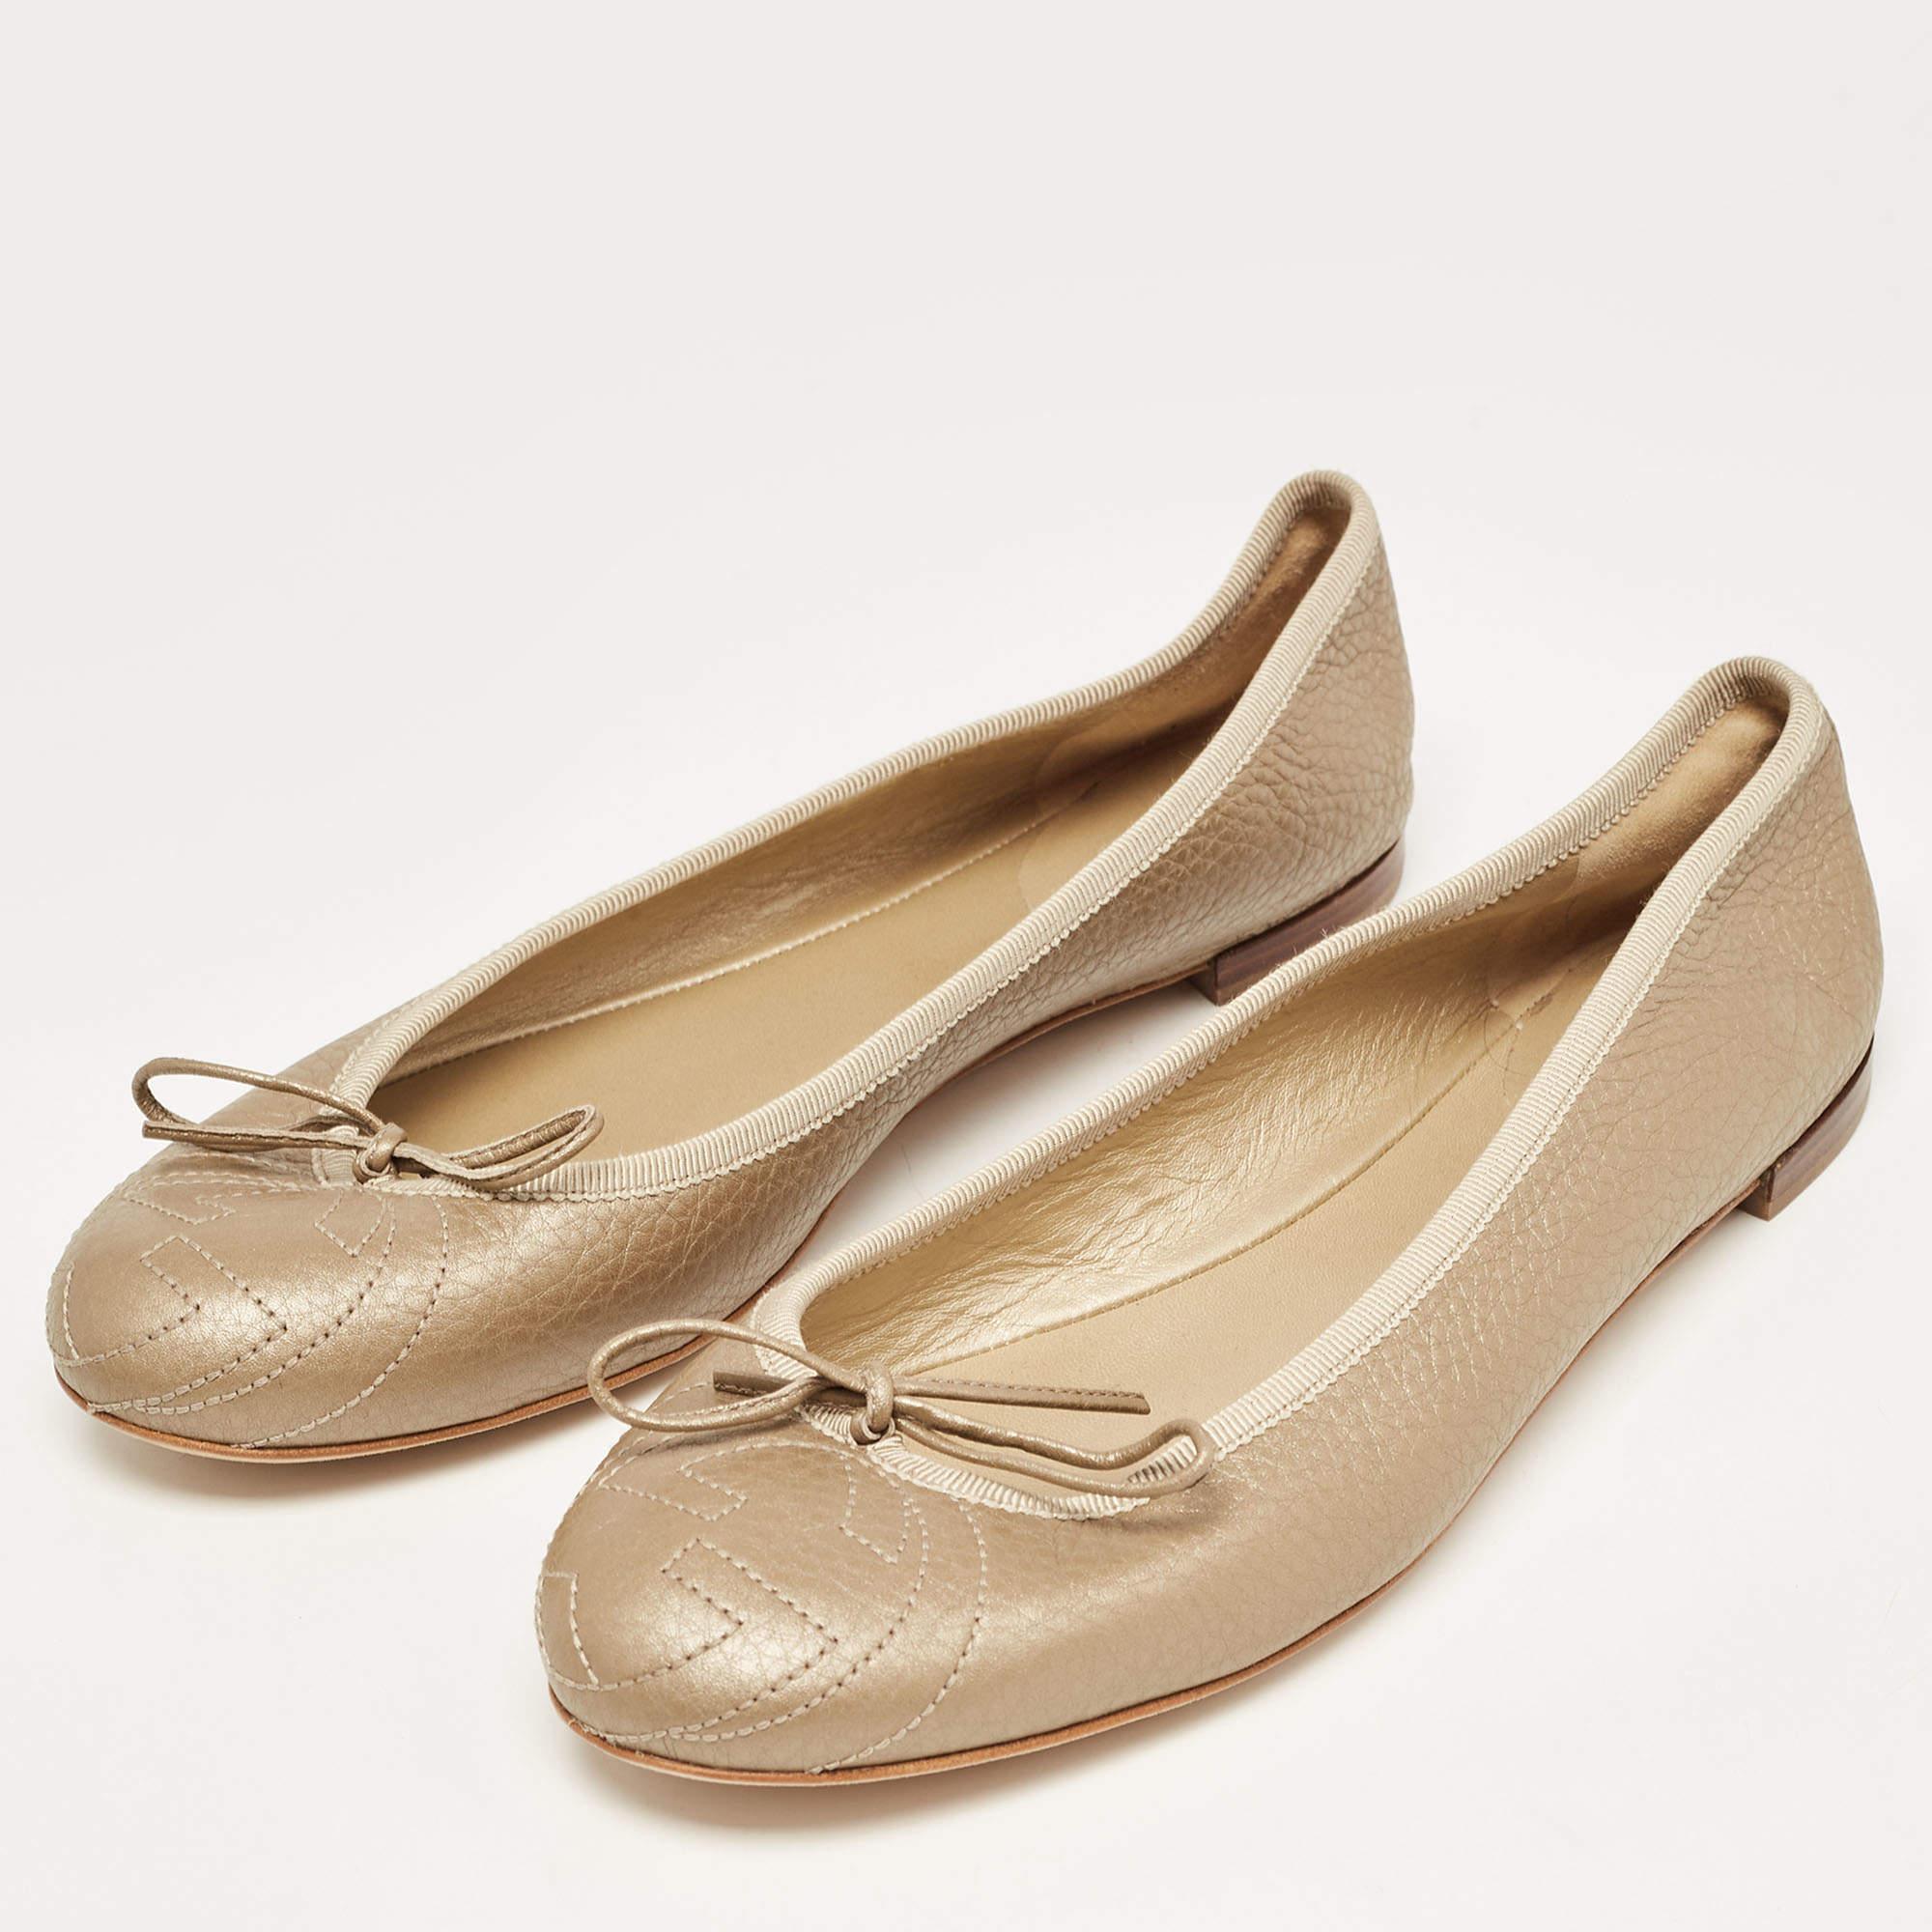 Complete your look by adding these Gucci gold ballet flats to your lovely wardrobe. They are crafted skilfully to grant the perfect fit and style.

